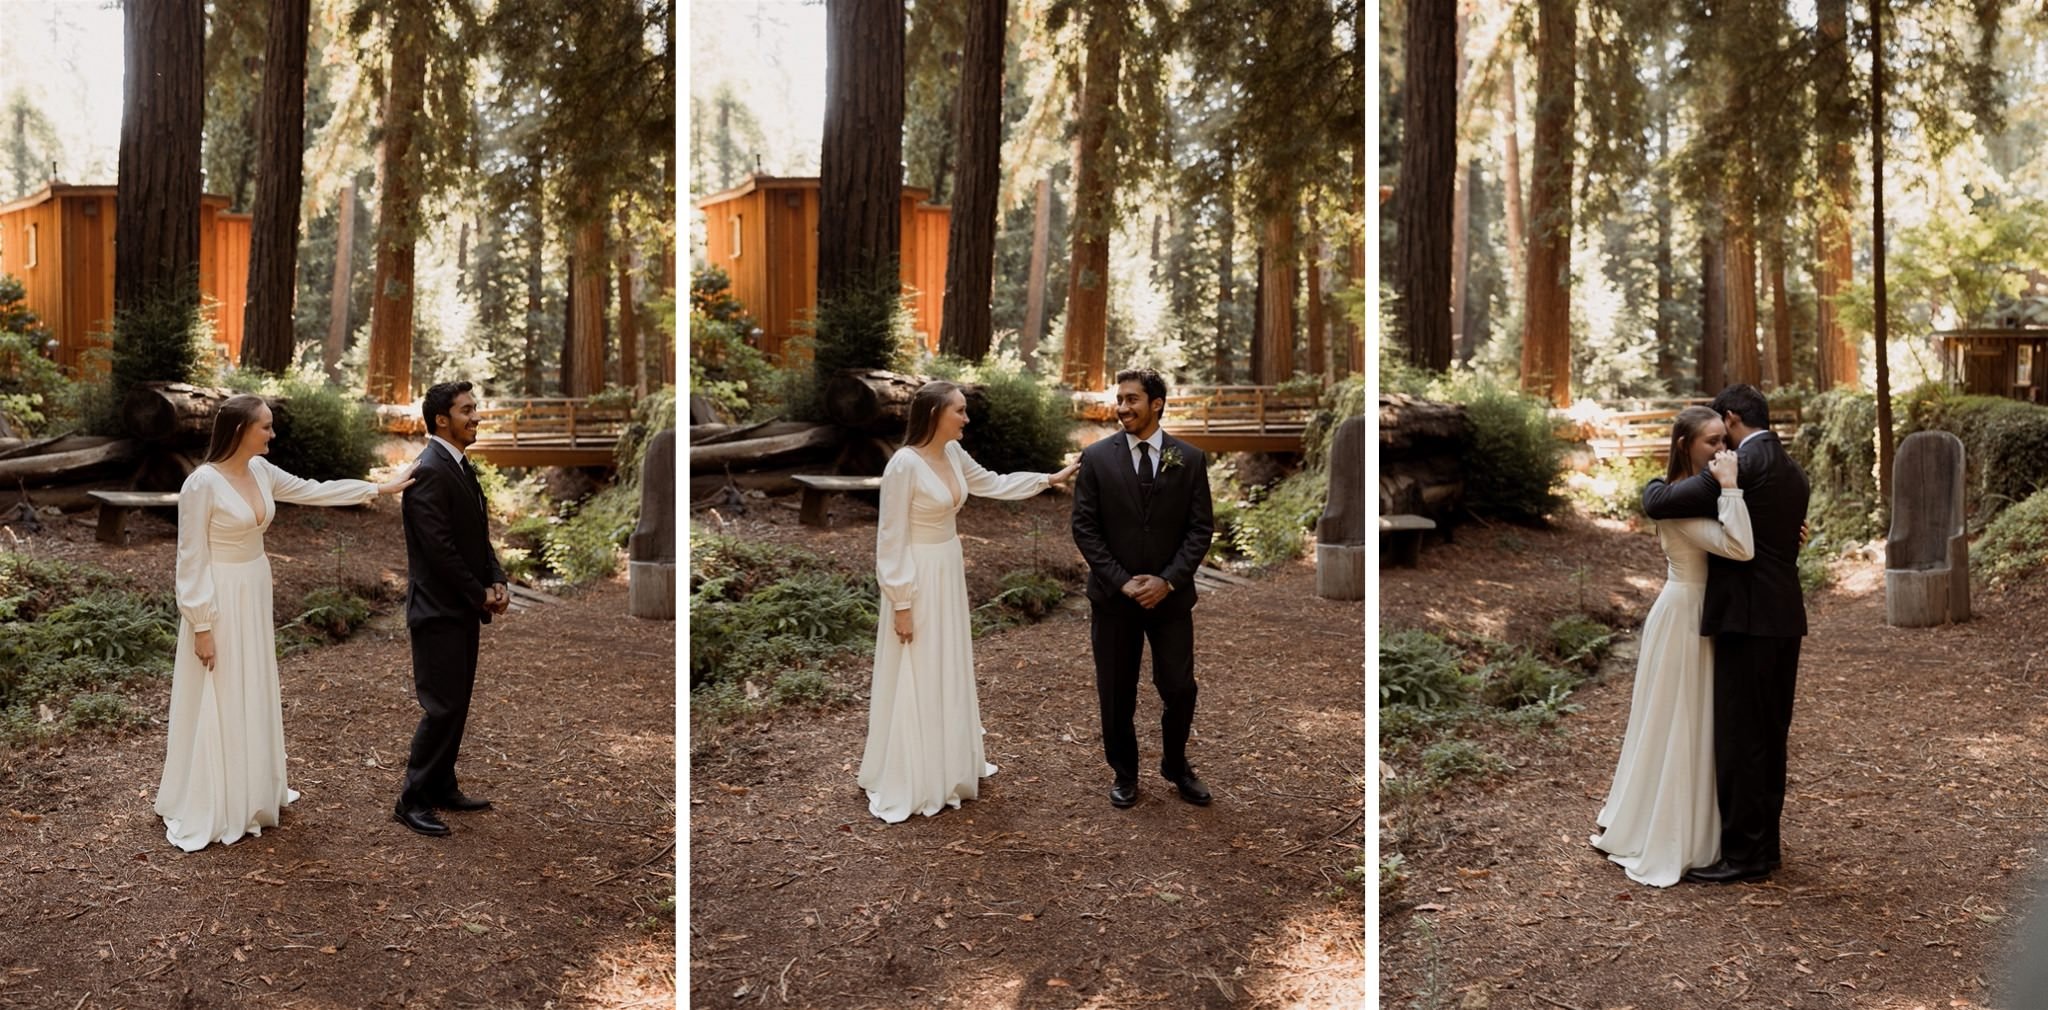 022_Two-Day Big Sur Redwoods Elopement with Family_Will Khoury Elopement Photographer.jpg